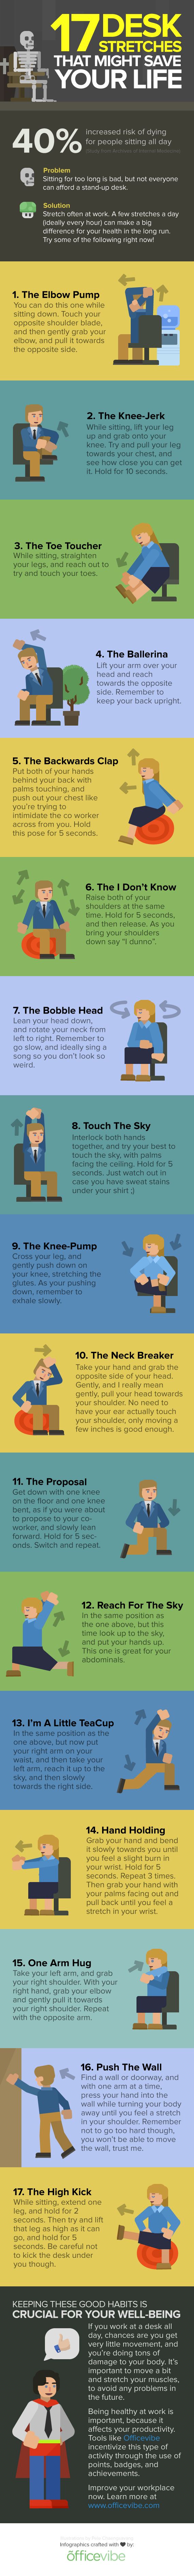 17 Desk Stretches to Save Your Workday (And Your Life!)